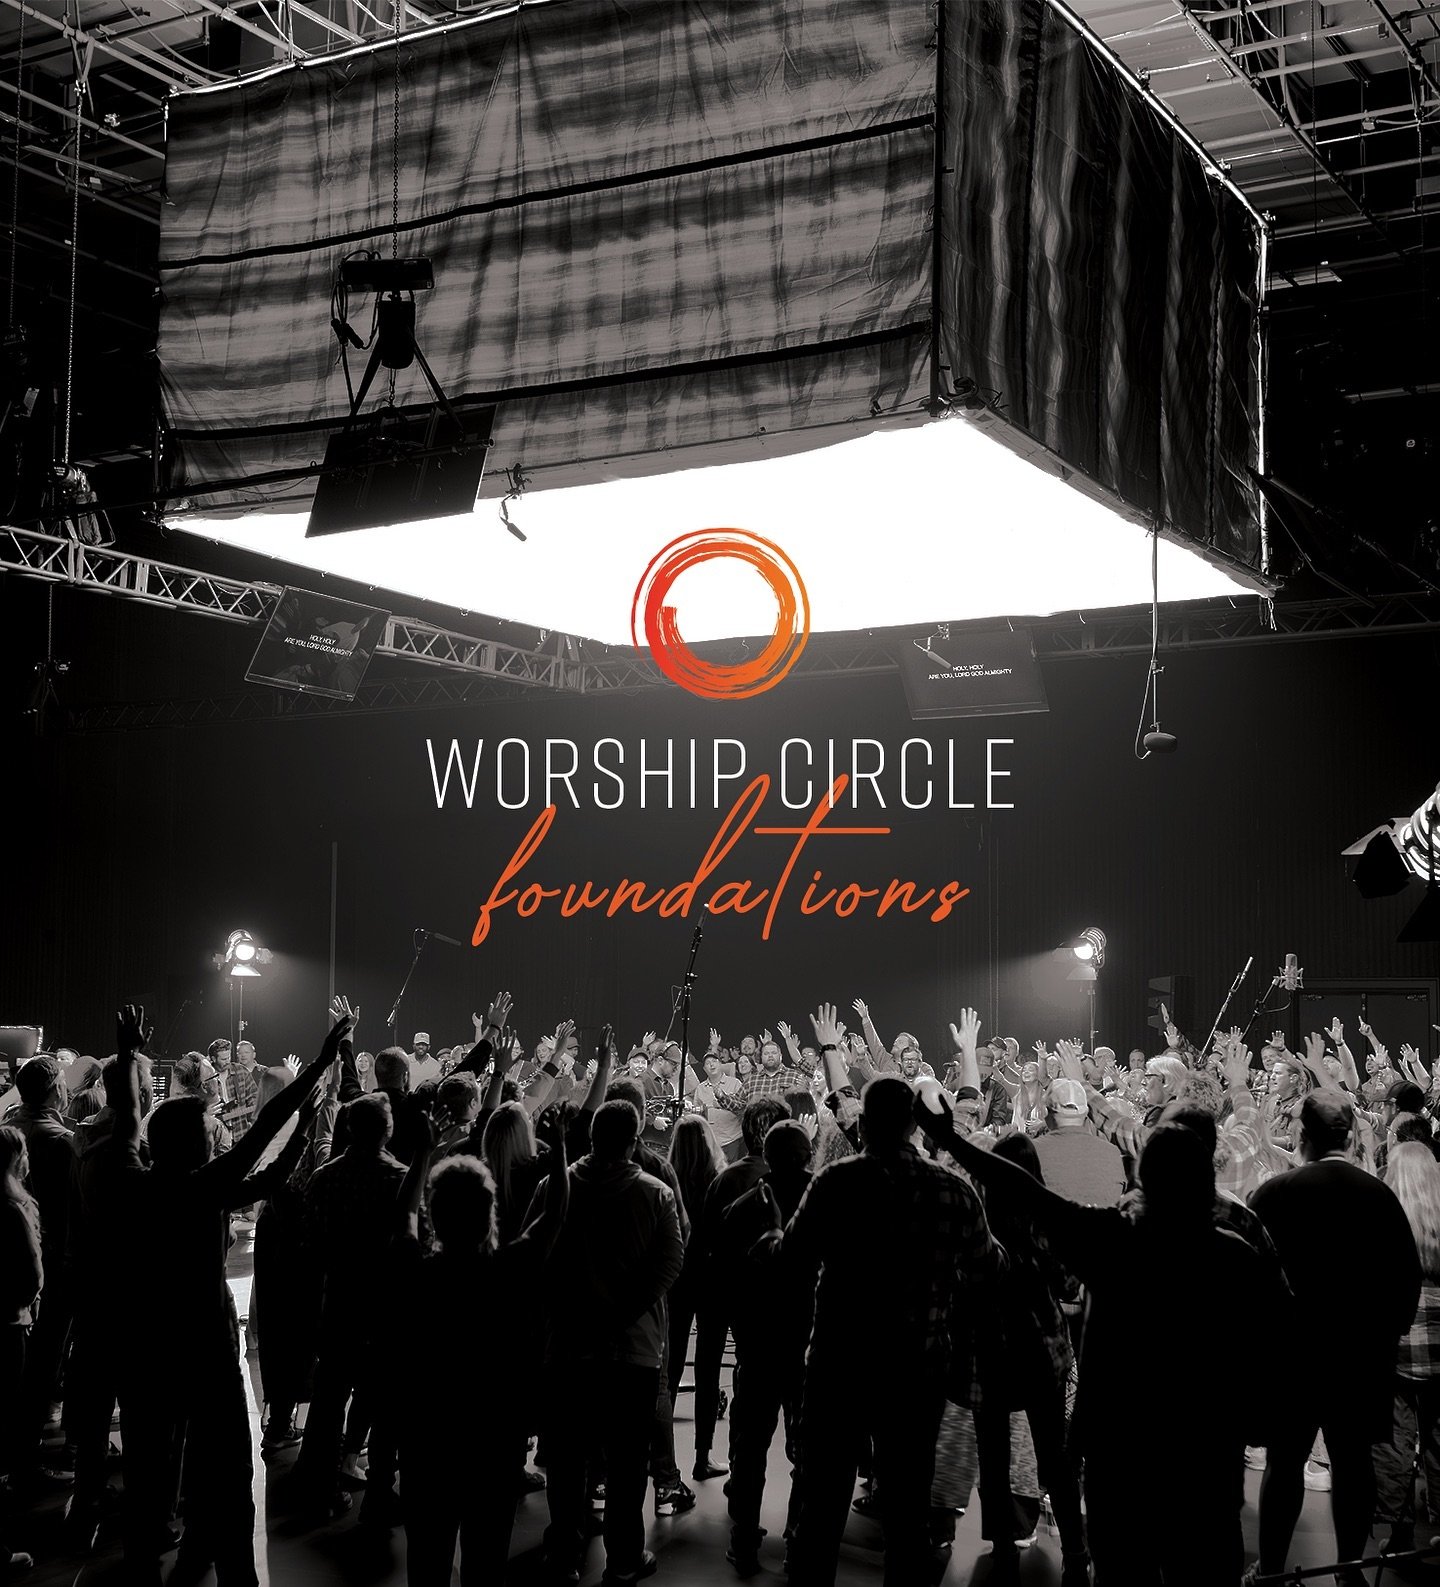 1 MONTH AWAY from the launch of our Worship Circle Foundations live album - Stay tuned!